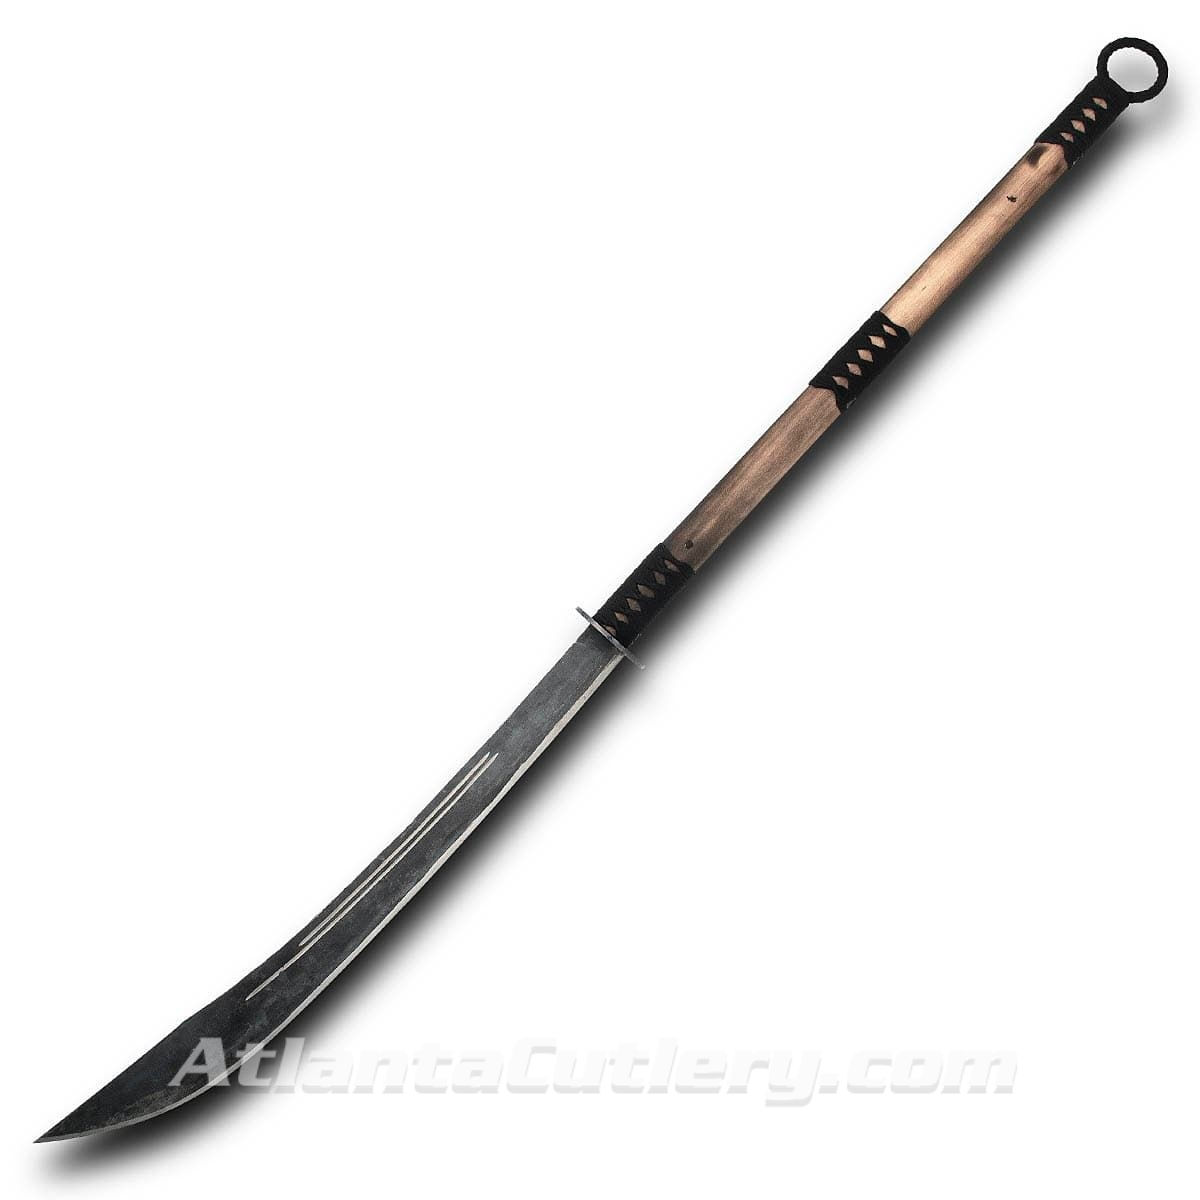 Hand Forged Naginata Carbon Steel Pole Weapon 